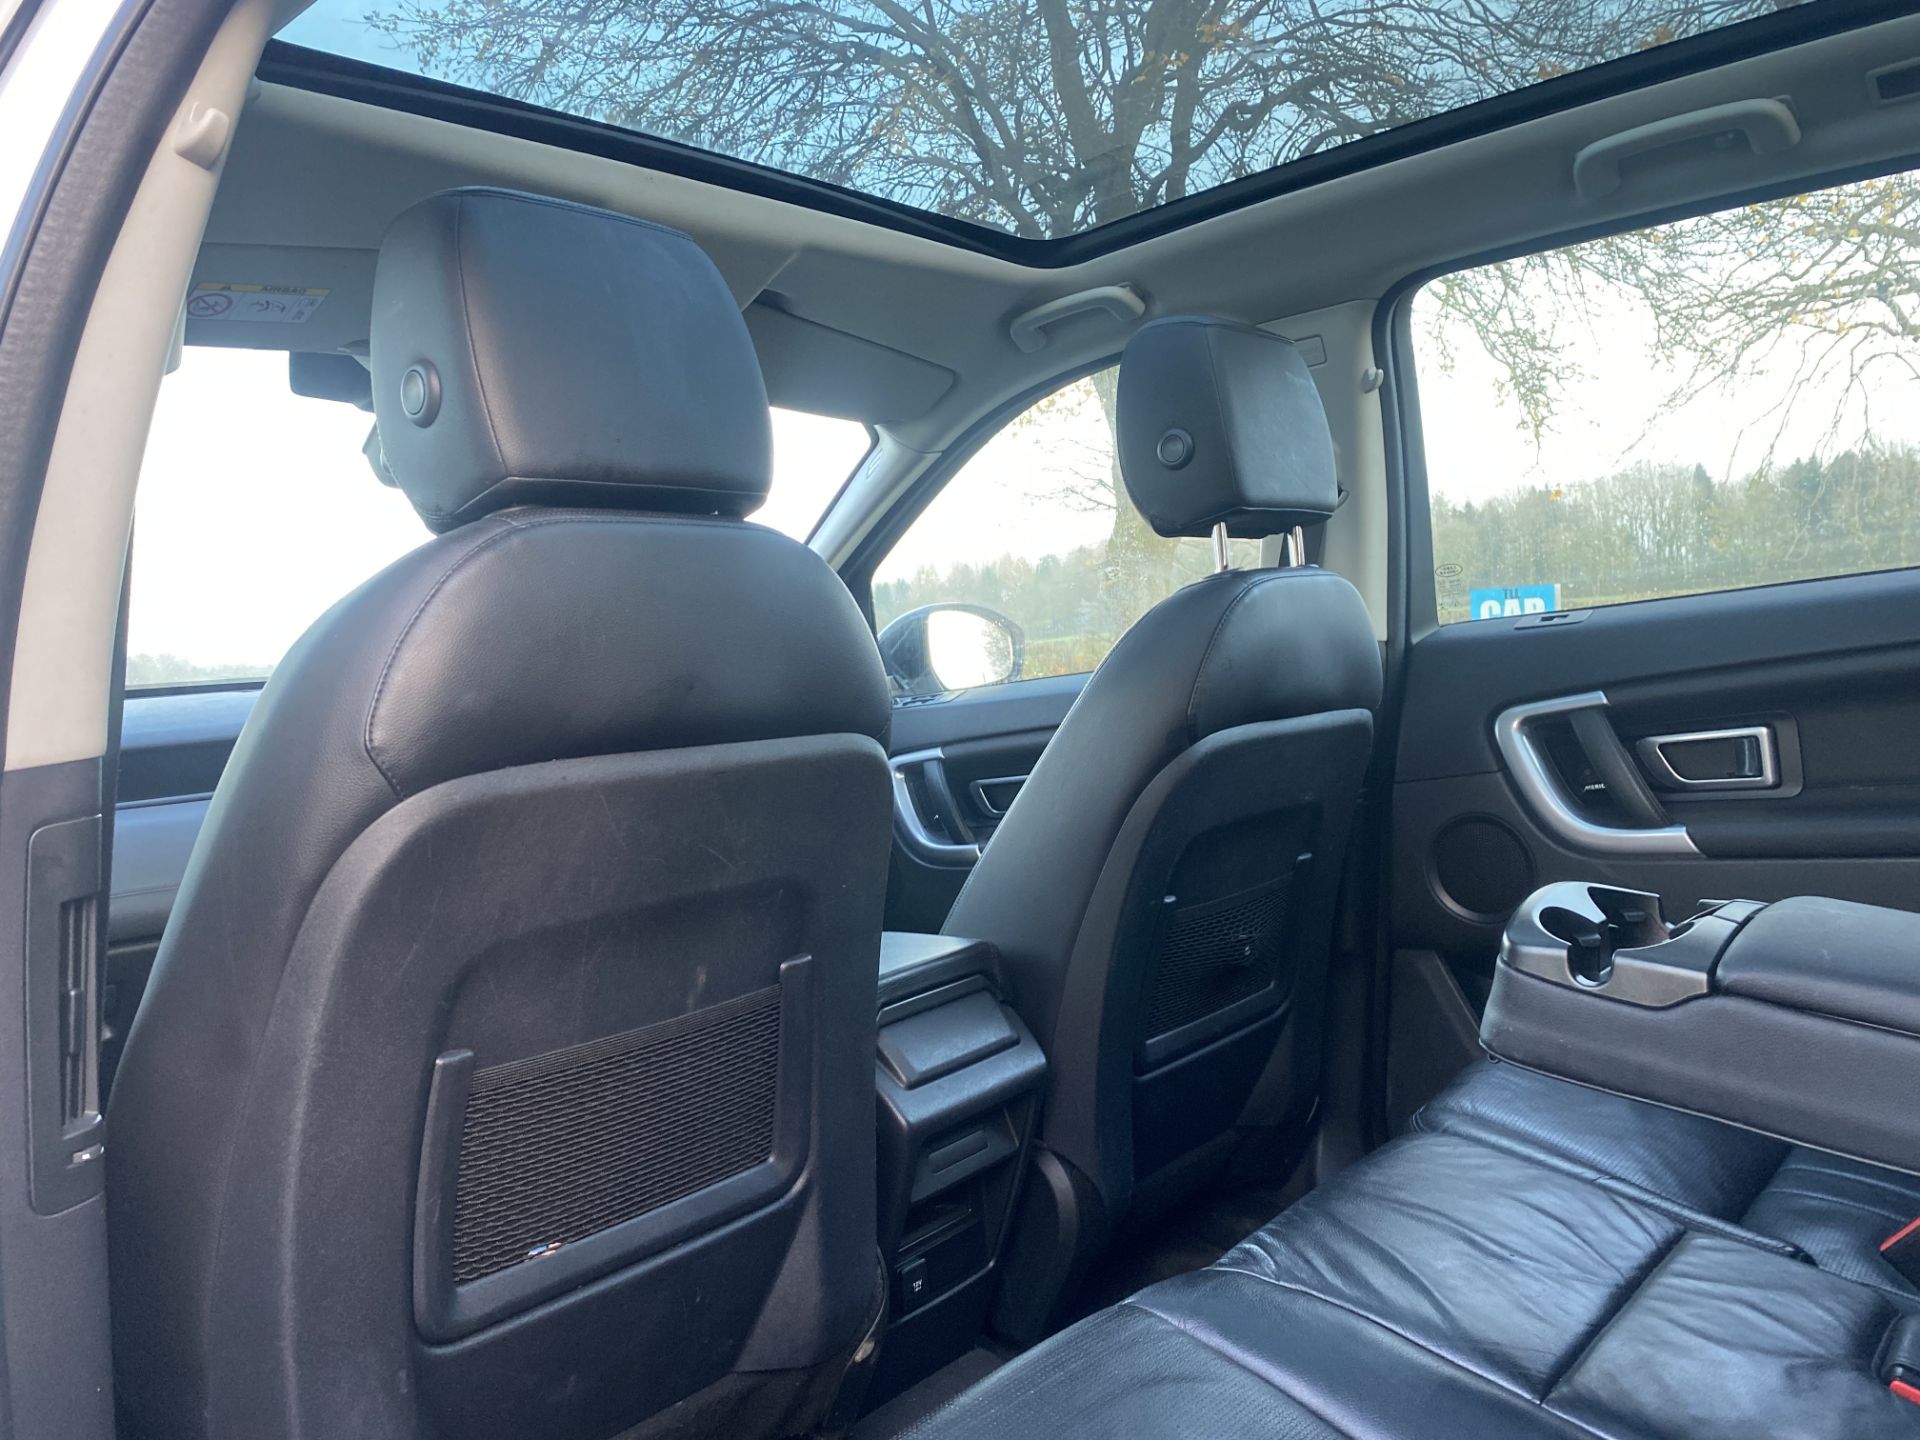 (ON SALE) LANDROVER DISCOVERY SPORT "HSE" 18 REG - 1 OWNER - LEATHER PANORAMIC ROOF - FULLY LOADED - - Image 14 of 37